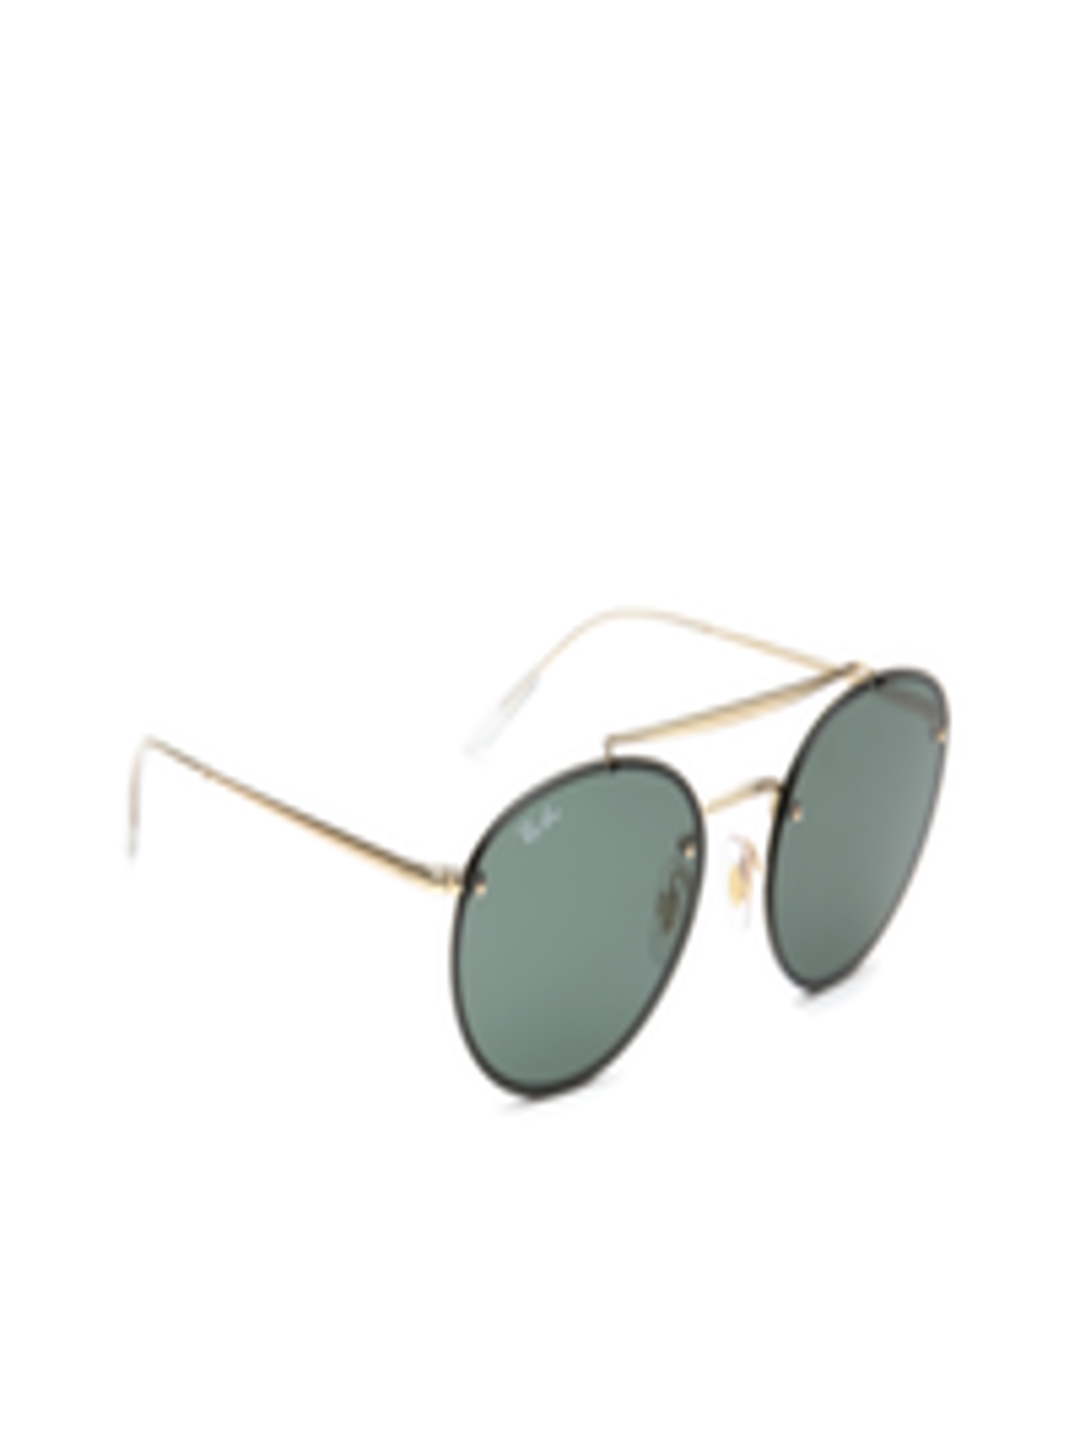 Buy Ray Ban Unisex Oval Sunglasses 0RB3614N91407 - Sunglasses for